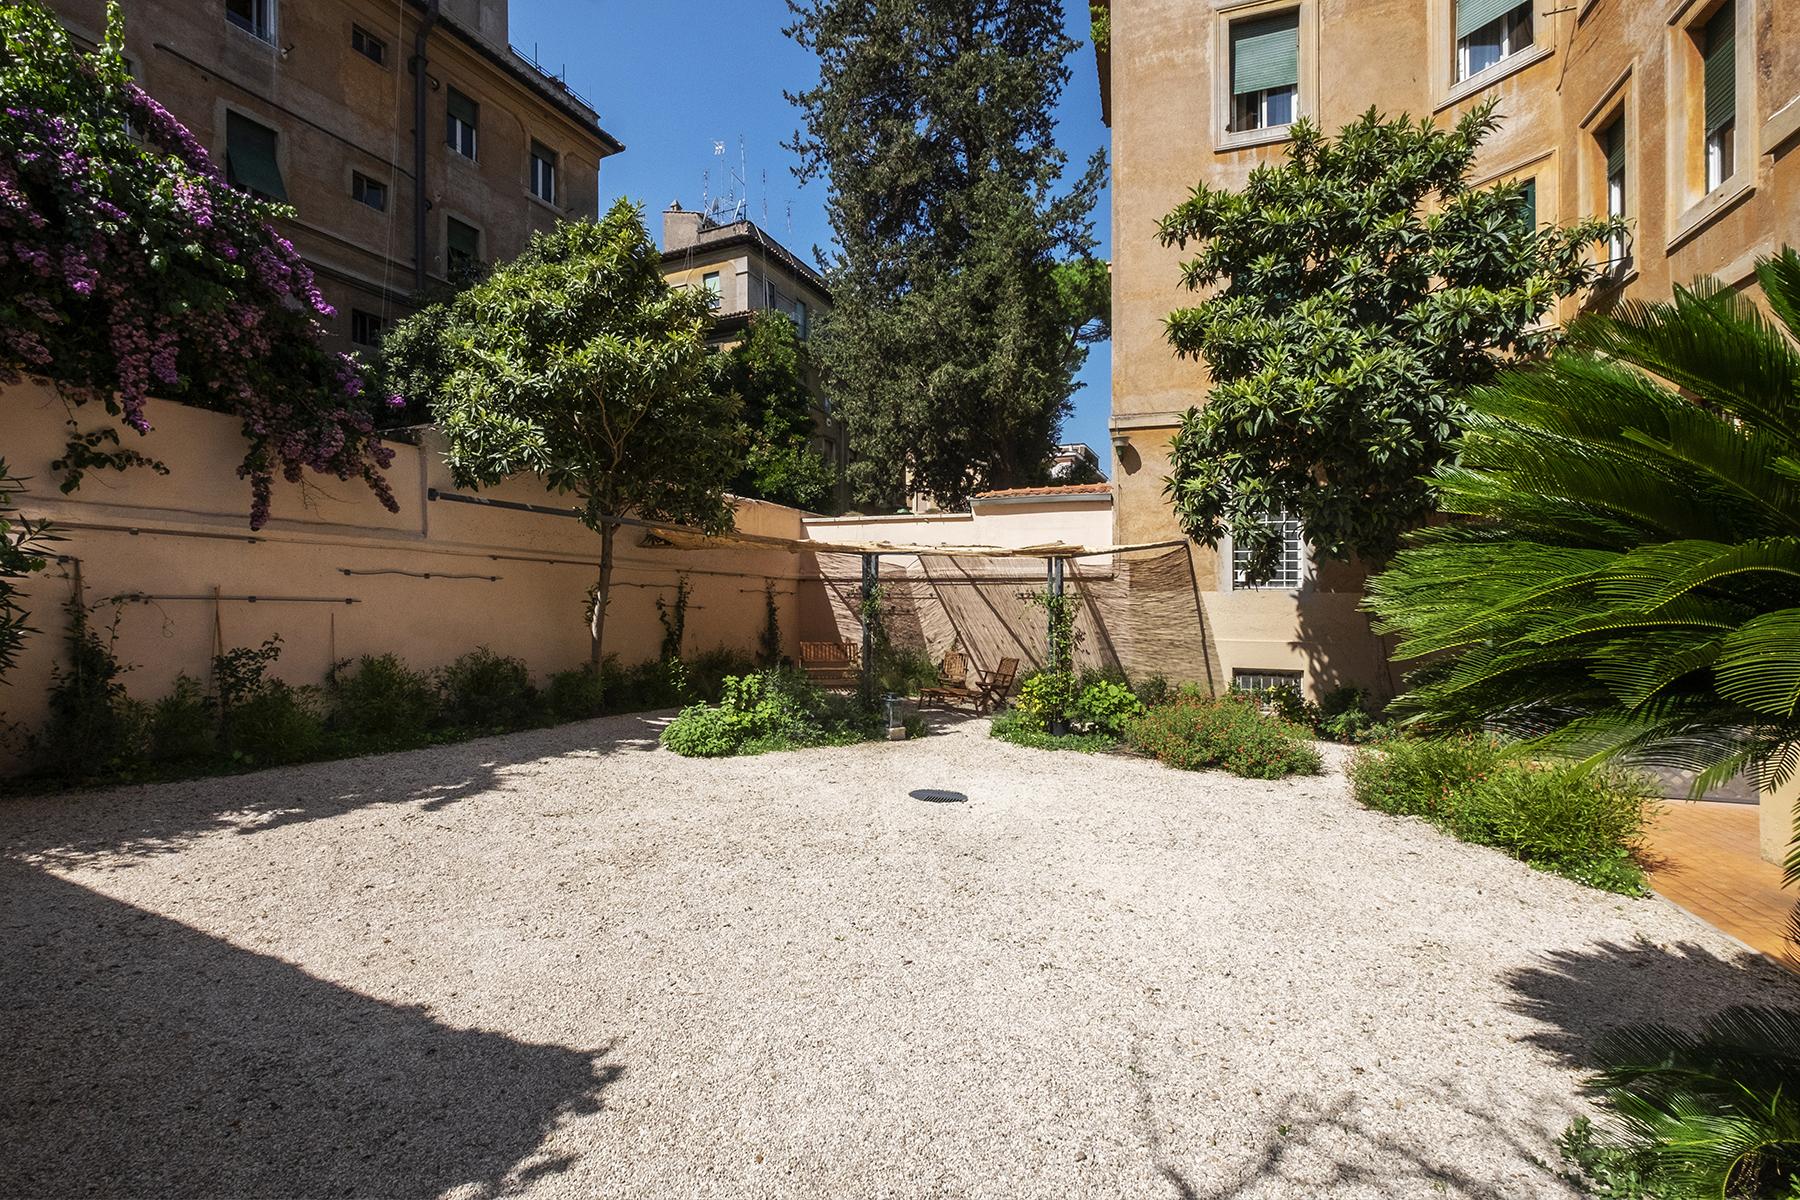 Elegant apartment with beautiful garden and 3 parking spaces in Parioli. - 24